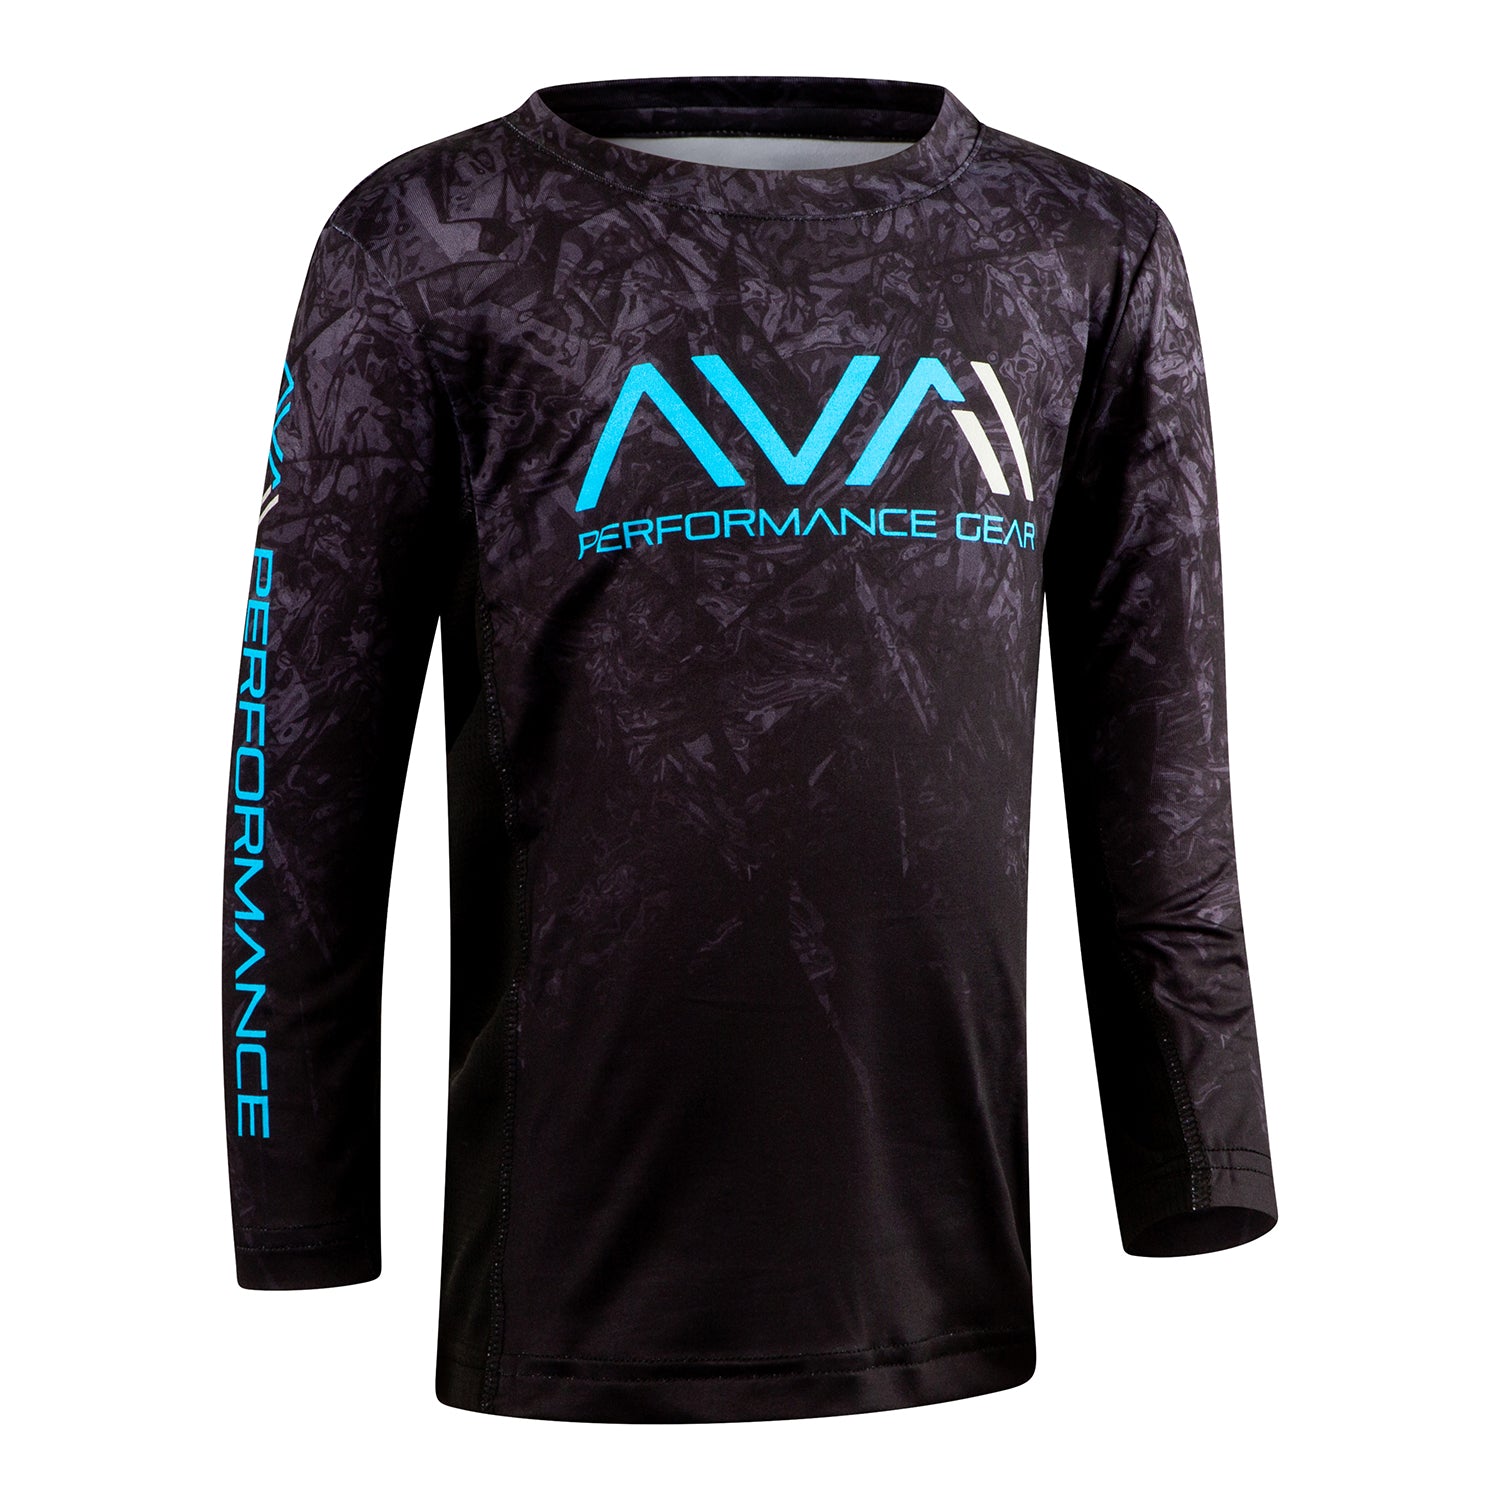 Youth GT Long Sleeve Performance Shirt – Availgear